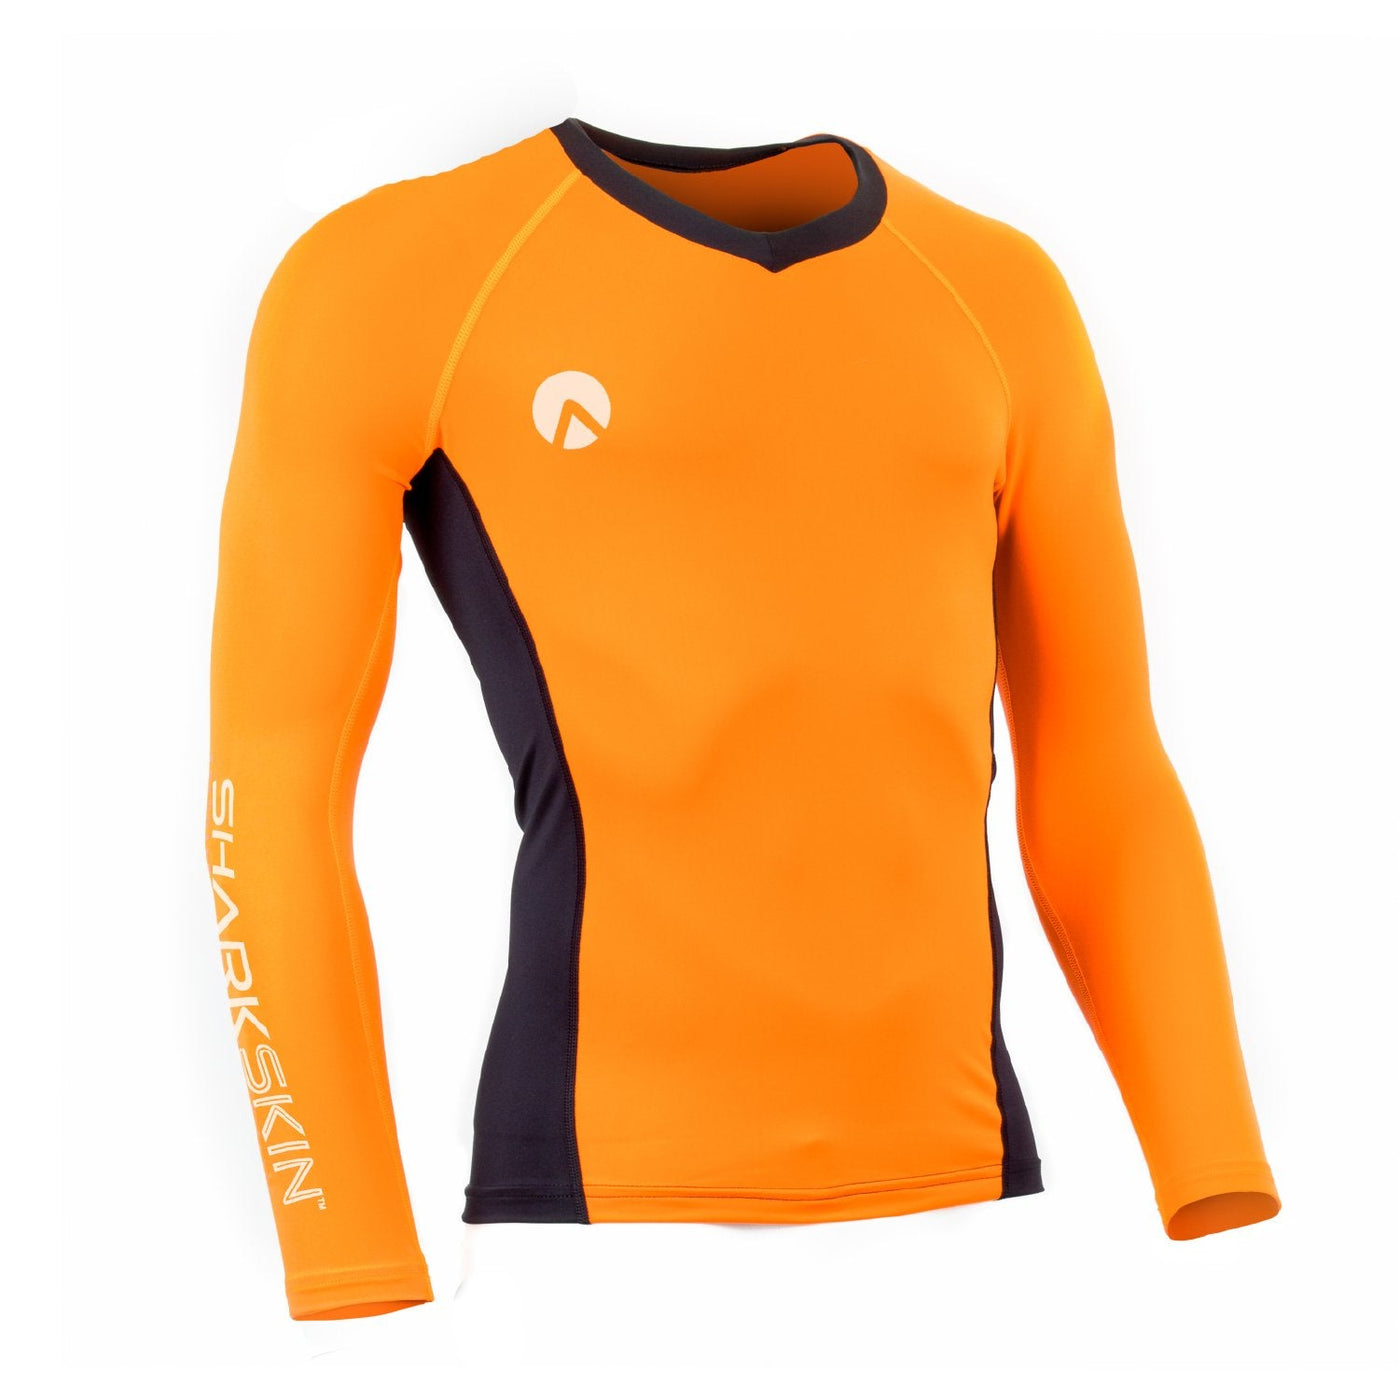 PERFORMANCE WEAR PRO LONG SLEEVE - ADULT (SECONDS)